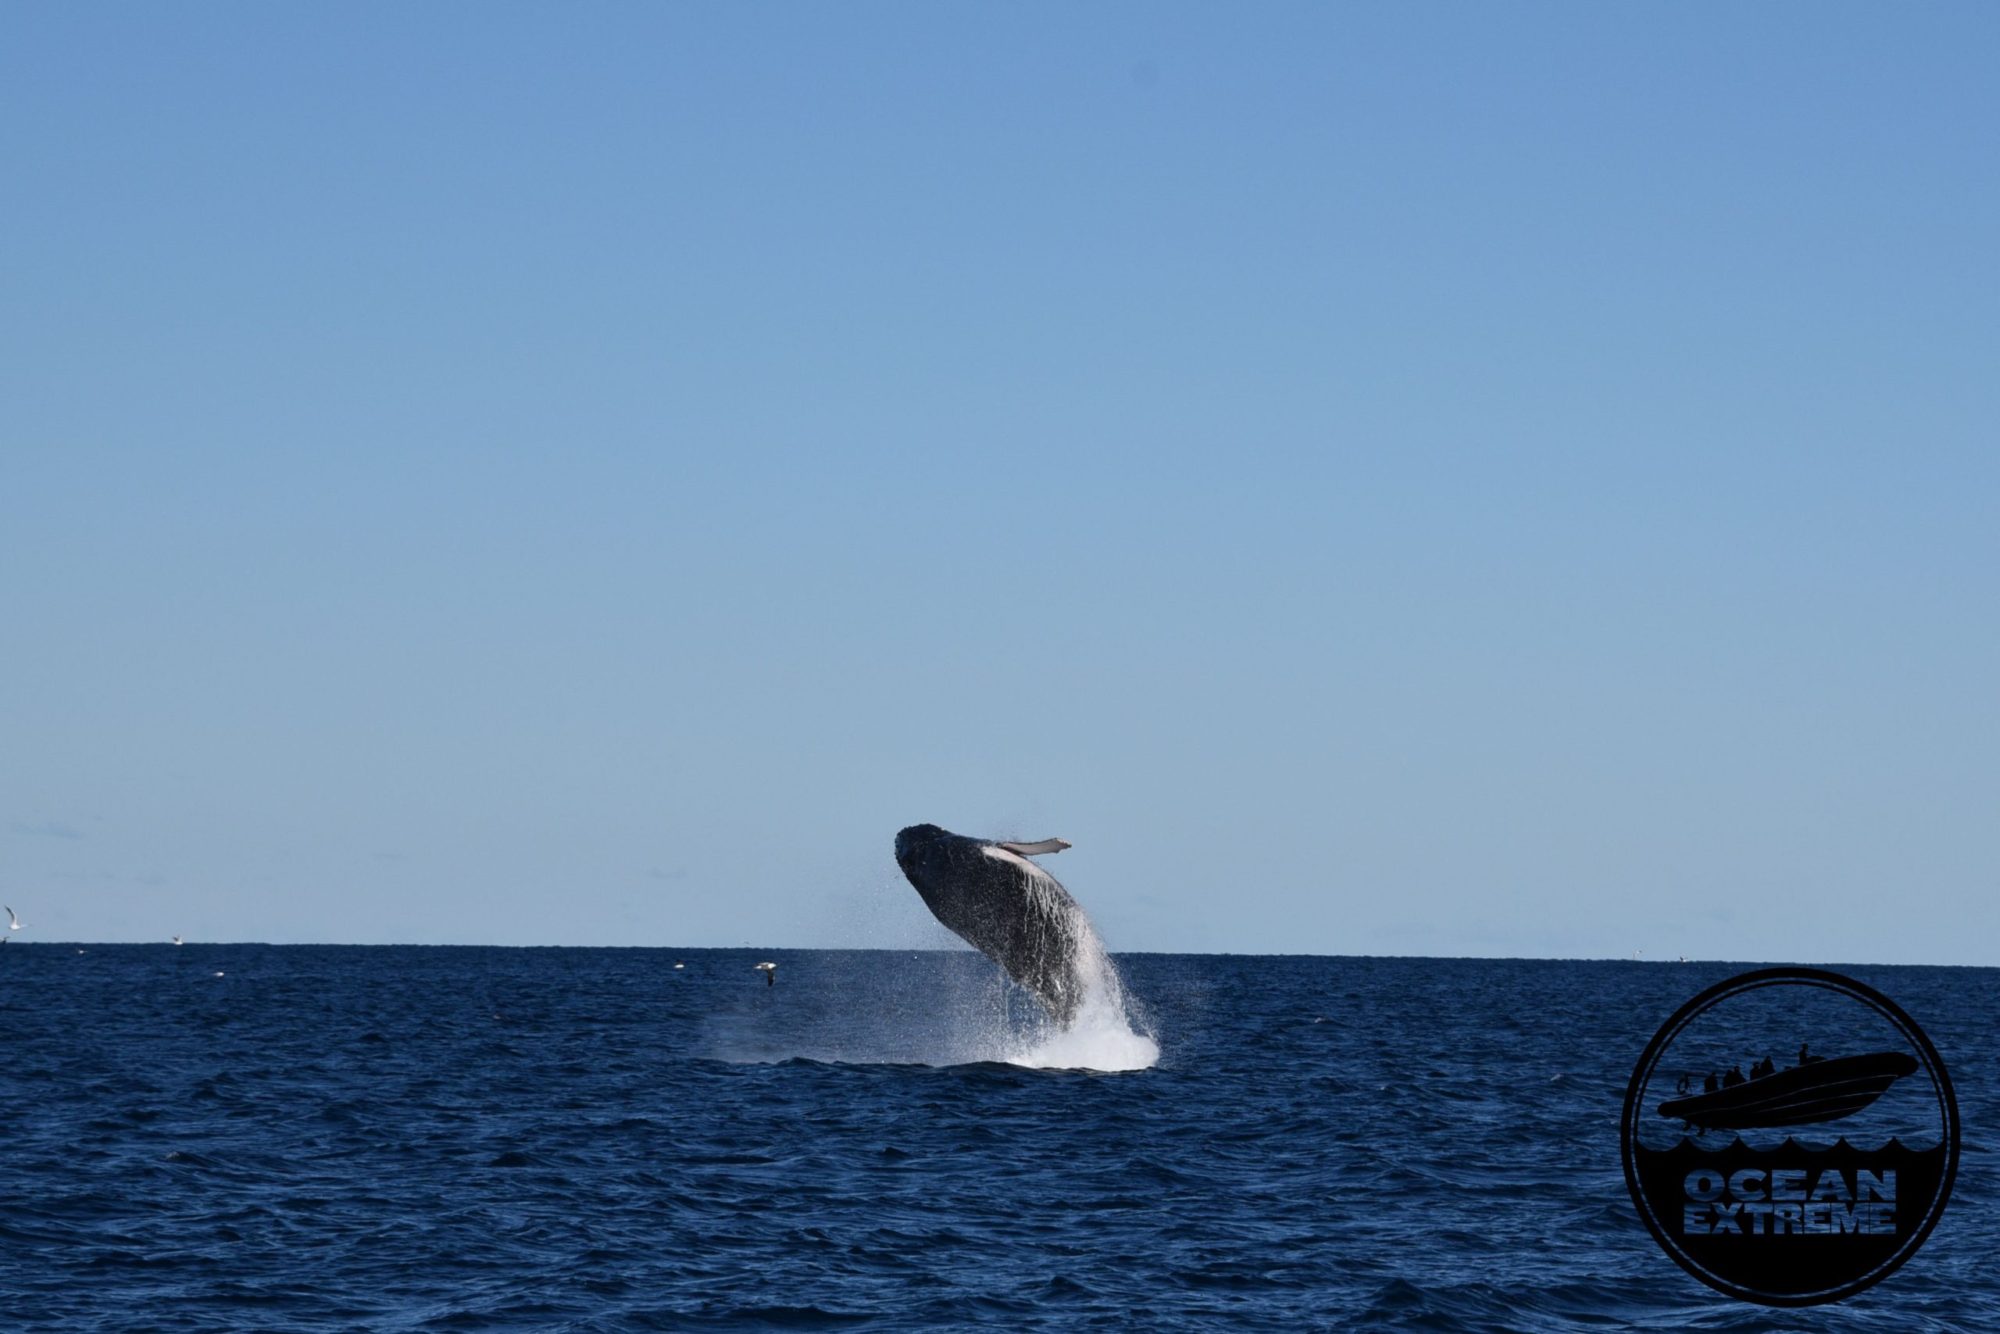 Whale watching in Sydney with Ocean extreme